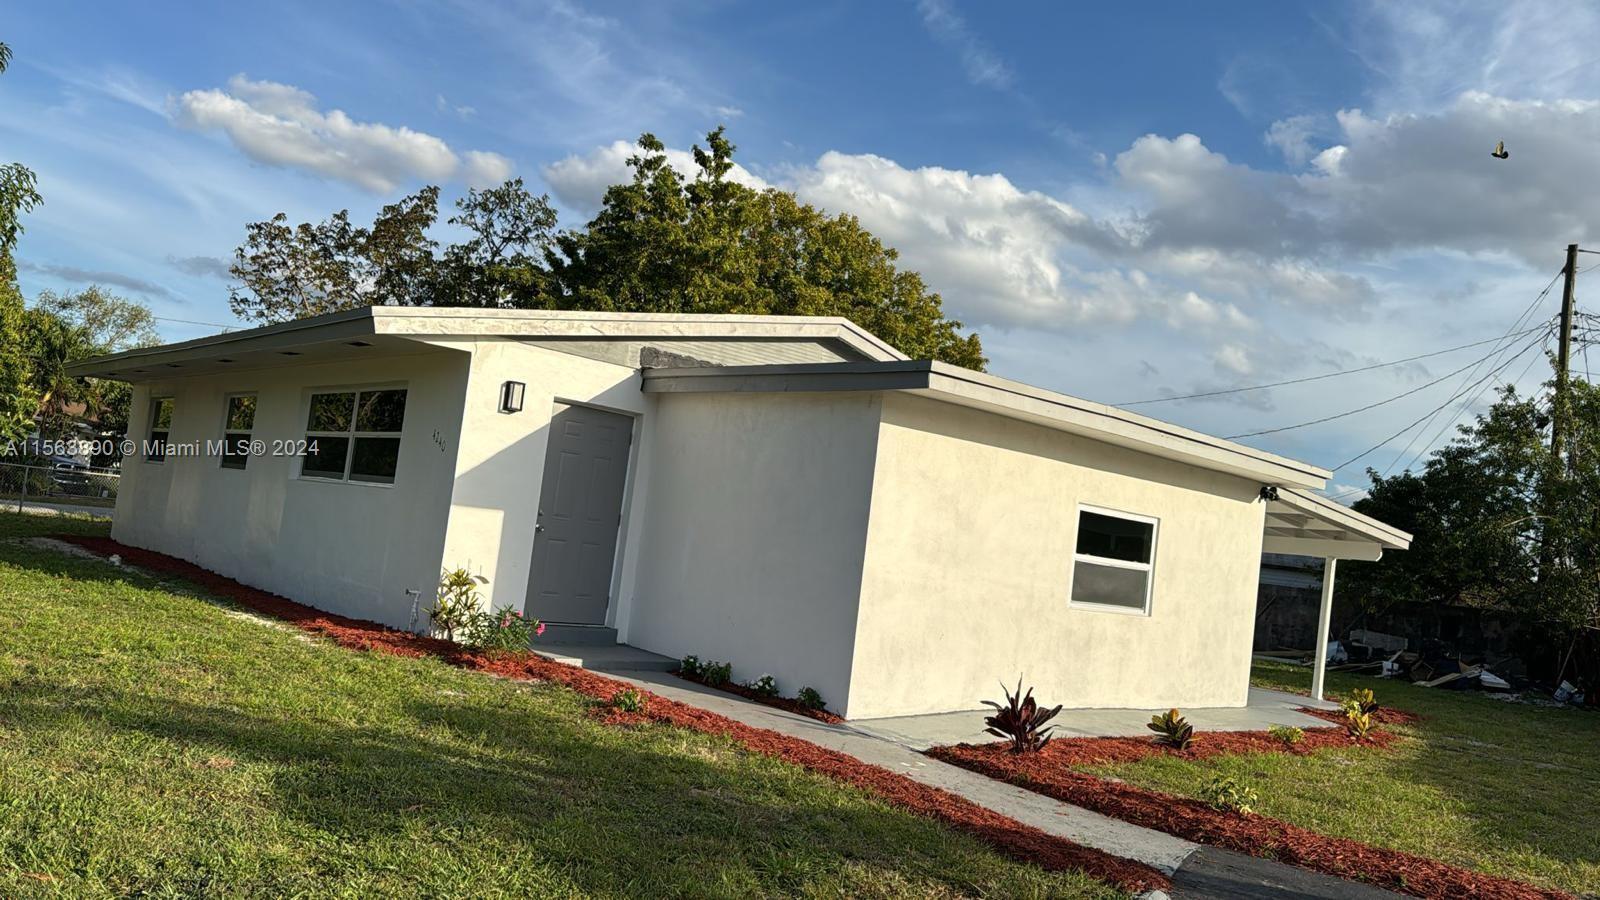 Photo of 4240 NW 192nd St in Miami Gardens, FL